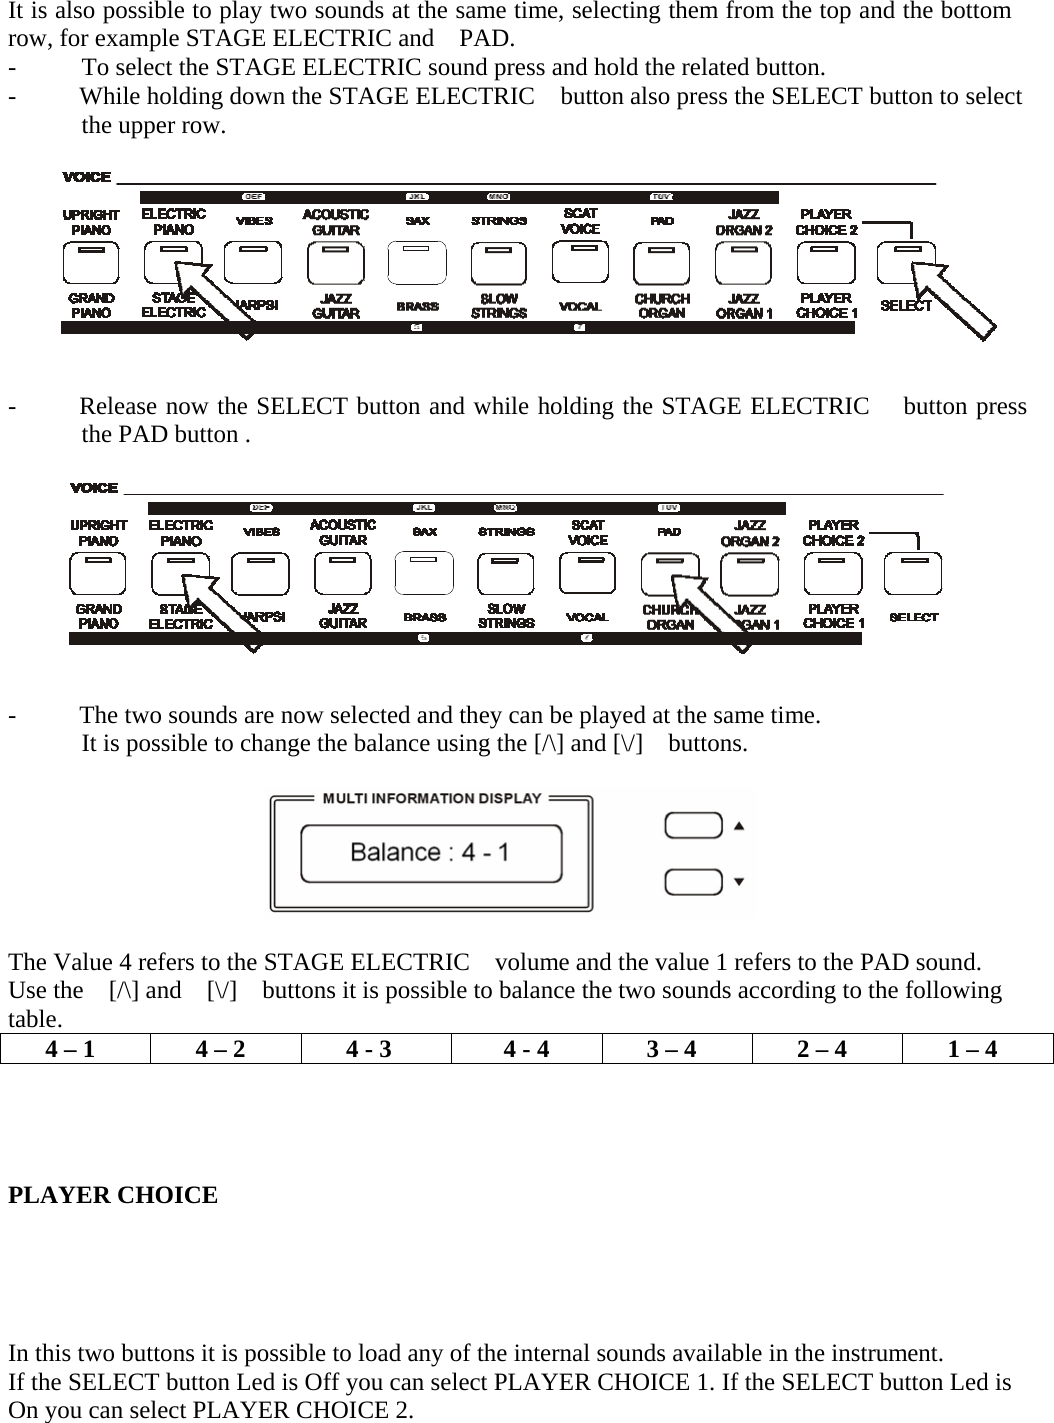    It is also possible to play two sounds at the same time, selecting them from the top and the bottom row, for example STAGE ELECTRIC and    PAD. -  To select the STAGE ELECTRIC sound press and hold the related button. -  While holding down the STAGE ELECTRIC    button also press the SELECT button to select the upper row.             -  Release now the SELECT button and while holding the STAGE ELECTRIC    button press the PAD button .             -  The two sounds are now selected and they can be played at the same time. It is possible to change the balance using the [/\] and [\/]    buttons.    The Value 4 refers to the STAGE ELECTRIC    volume and the value 1 refers to the PAD sound. Use the  [/\] and  [\/]  buttons it is possible to balance the two sounds according to the following table. 4 – 1 4 – 2 4 - 3 4 - 4 3 – 4 2 – 4 1 – 4      PLAYER CHOICE       In this two buttons it is possible to load any of the internal sounds available in the instrument. If the SELECT button Led is Off you can select PLAYER CHOICE 1. If the SELECT button Led is On you can select PLAYER CHOICE 2.     